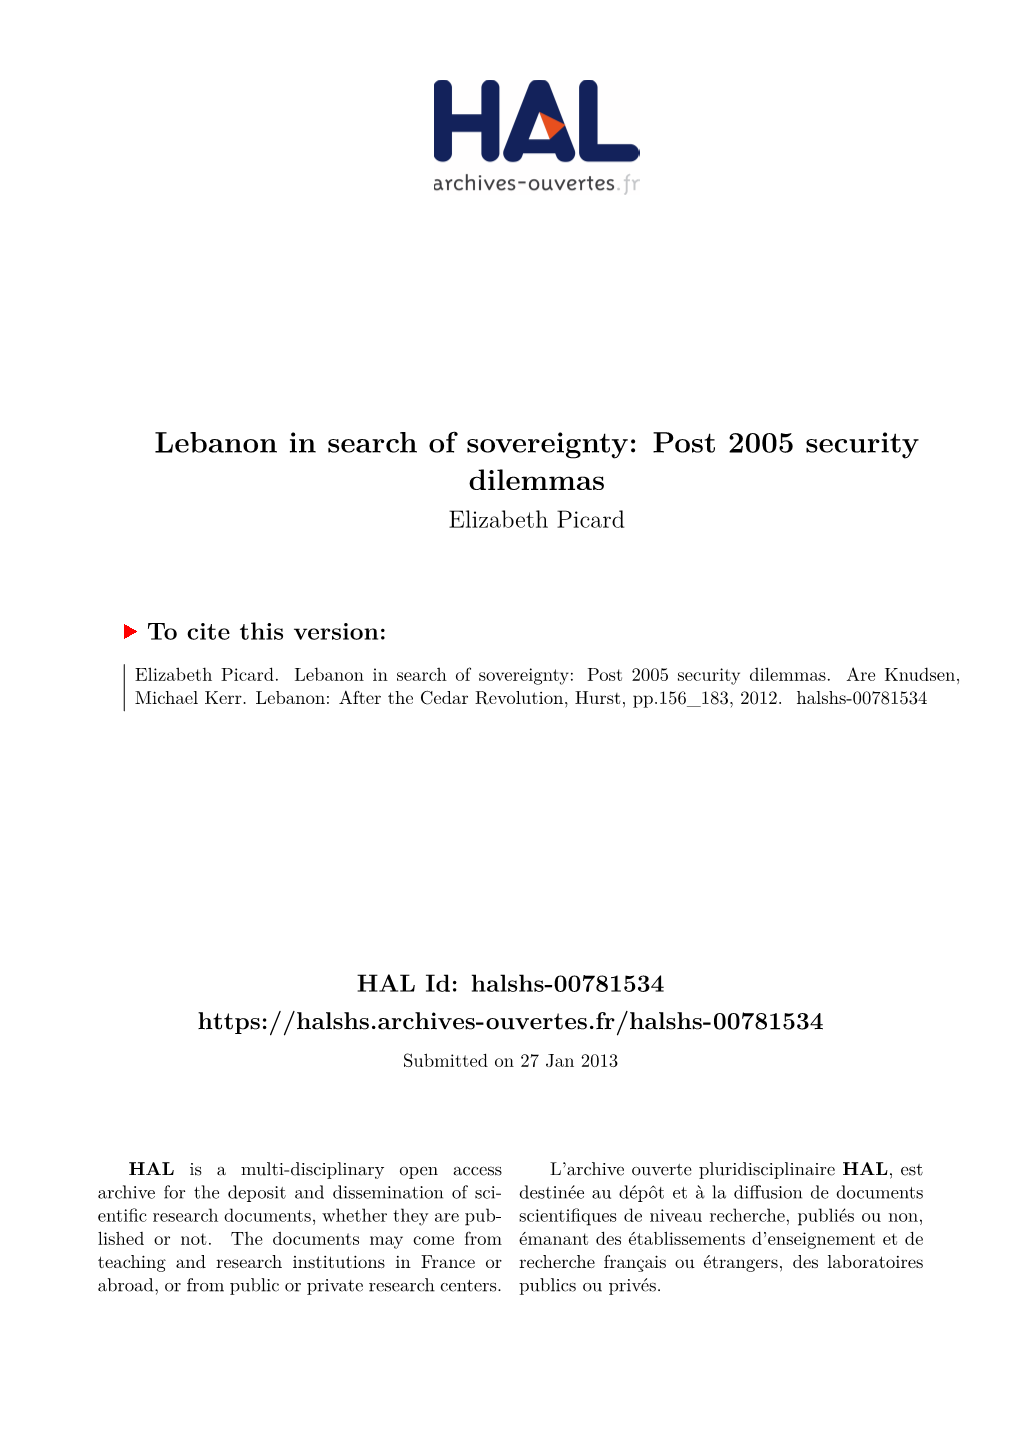 Lebanon in Search of Sovereignty: Post 2005 Security Dilemmas Elizabeth Picard